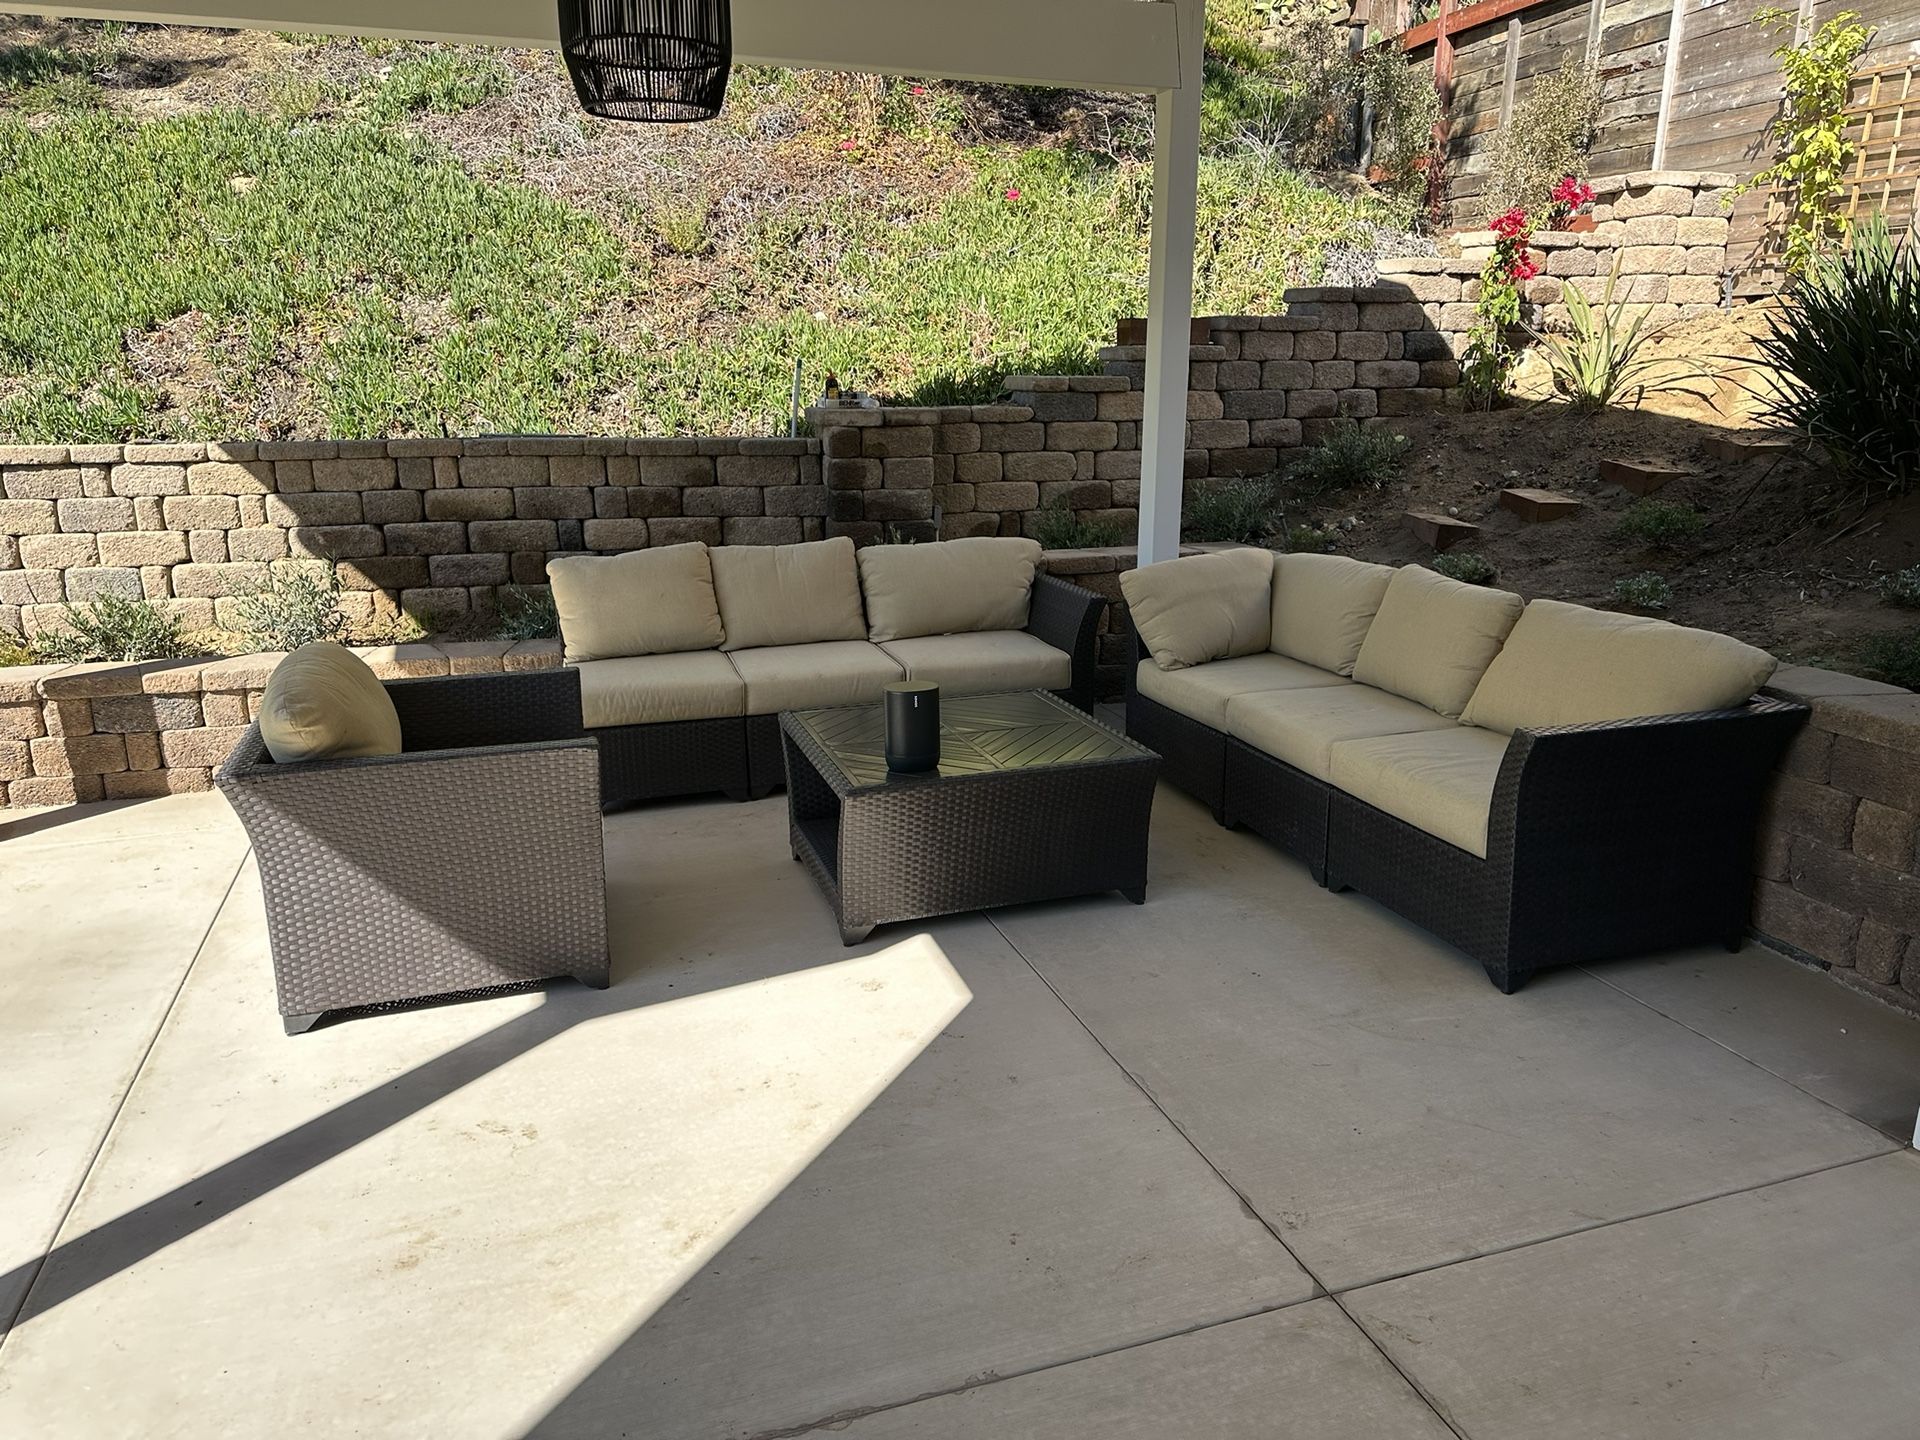 7 Seat Modular Sectional Outdoor Sofa With Armchair And Coffee Table